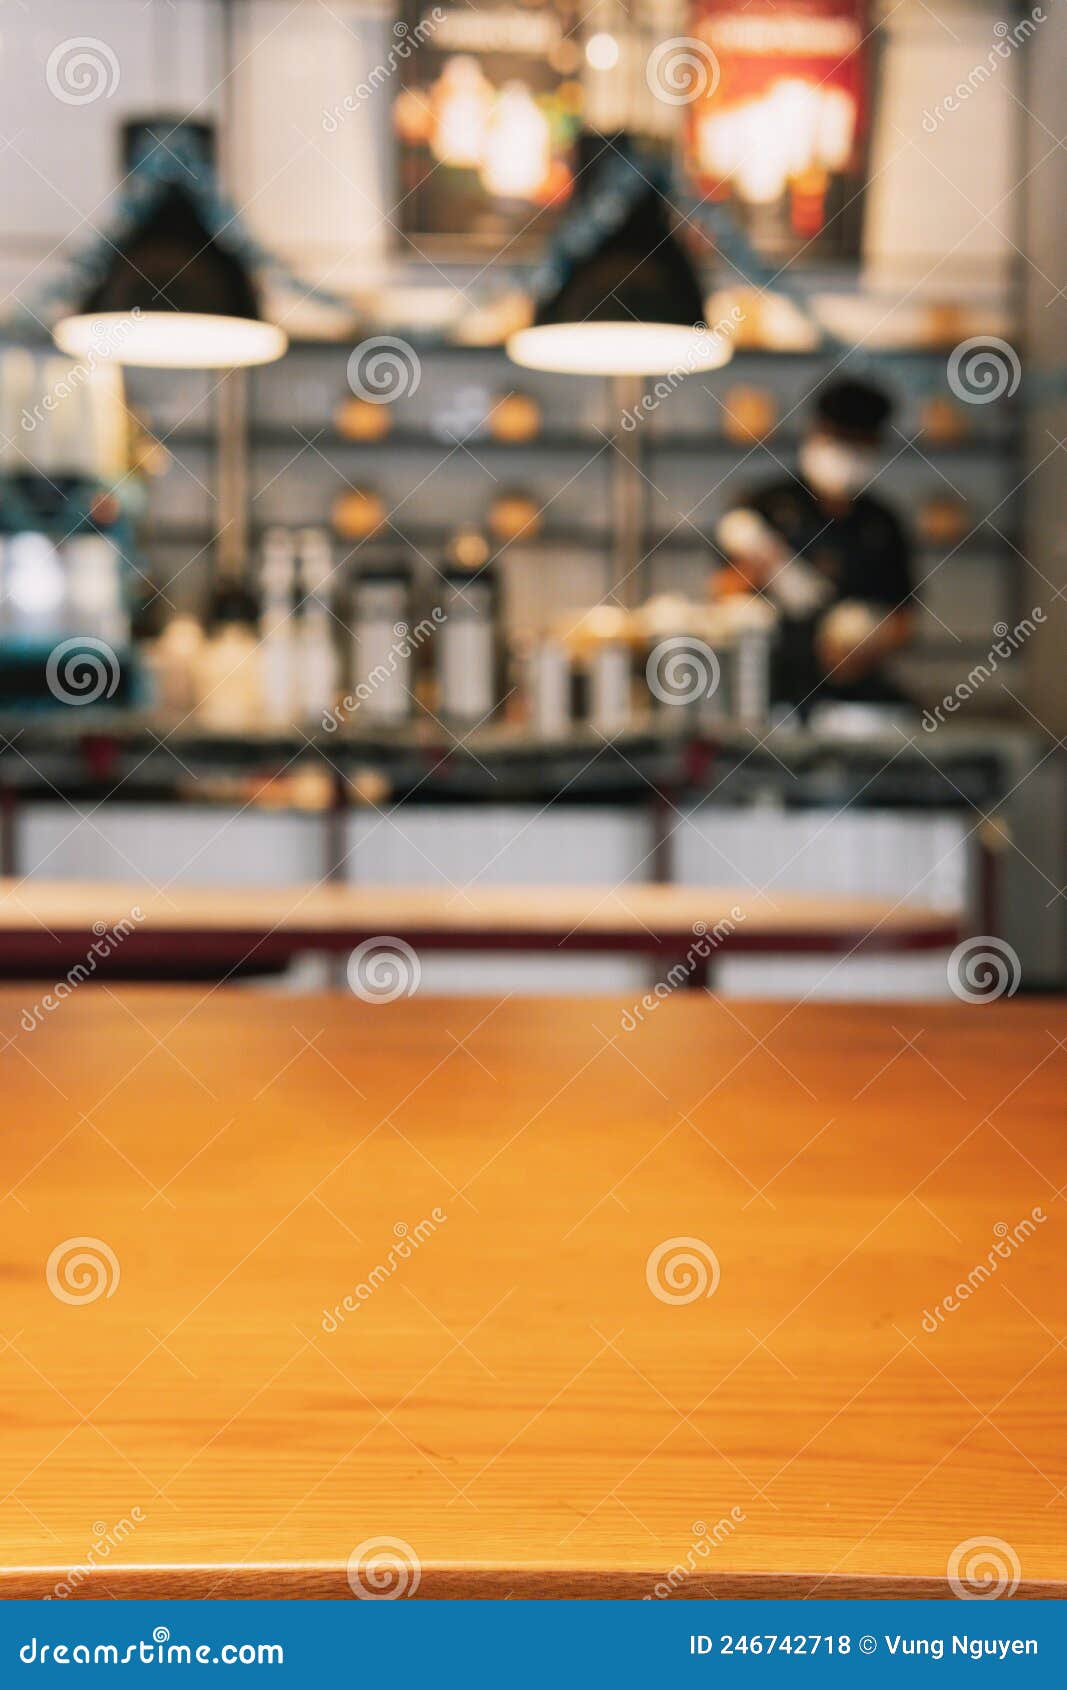 wood table top with blur of people in coffee shop or cafe,restaurant  background